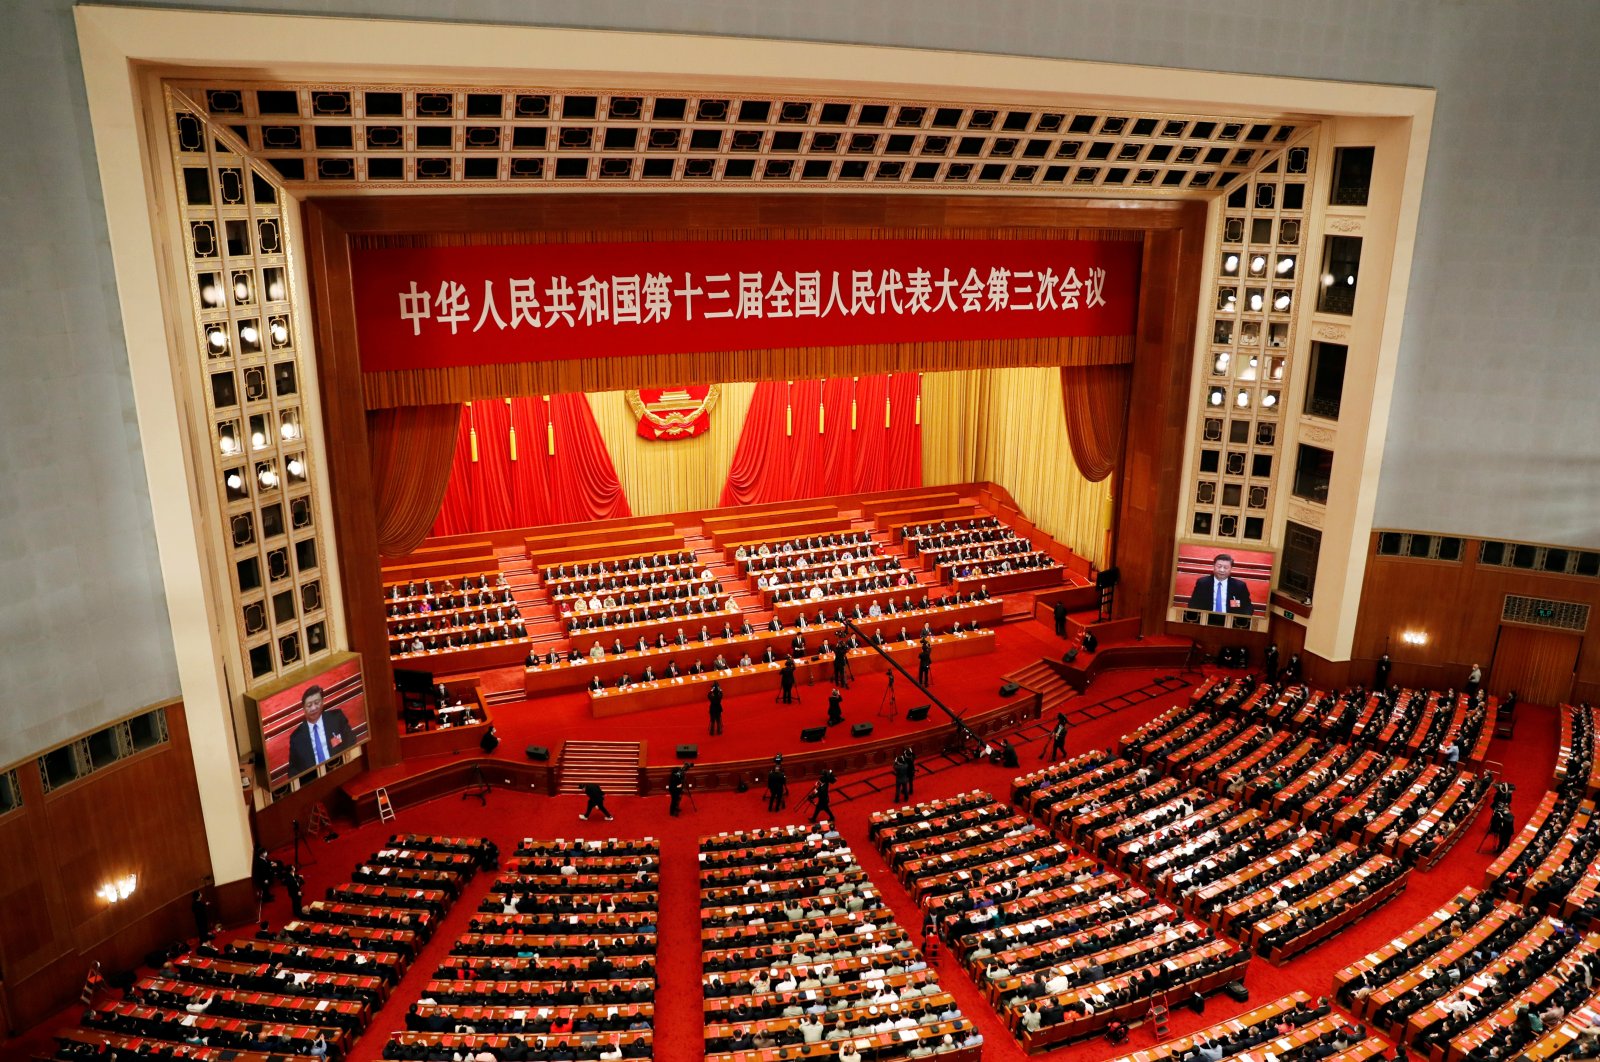 Chinese officials and delegates attend the closing session of the National People's Congress (NPC) at the Great Hall of the People in Beijing, China May 28, 2020. (Reuters Photo)